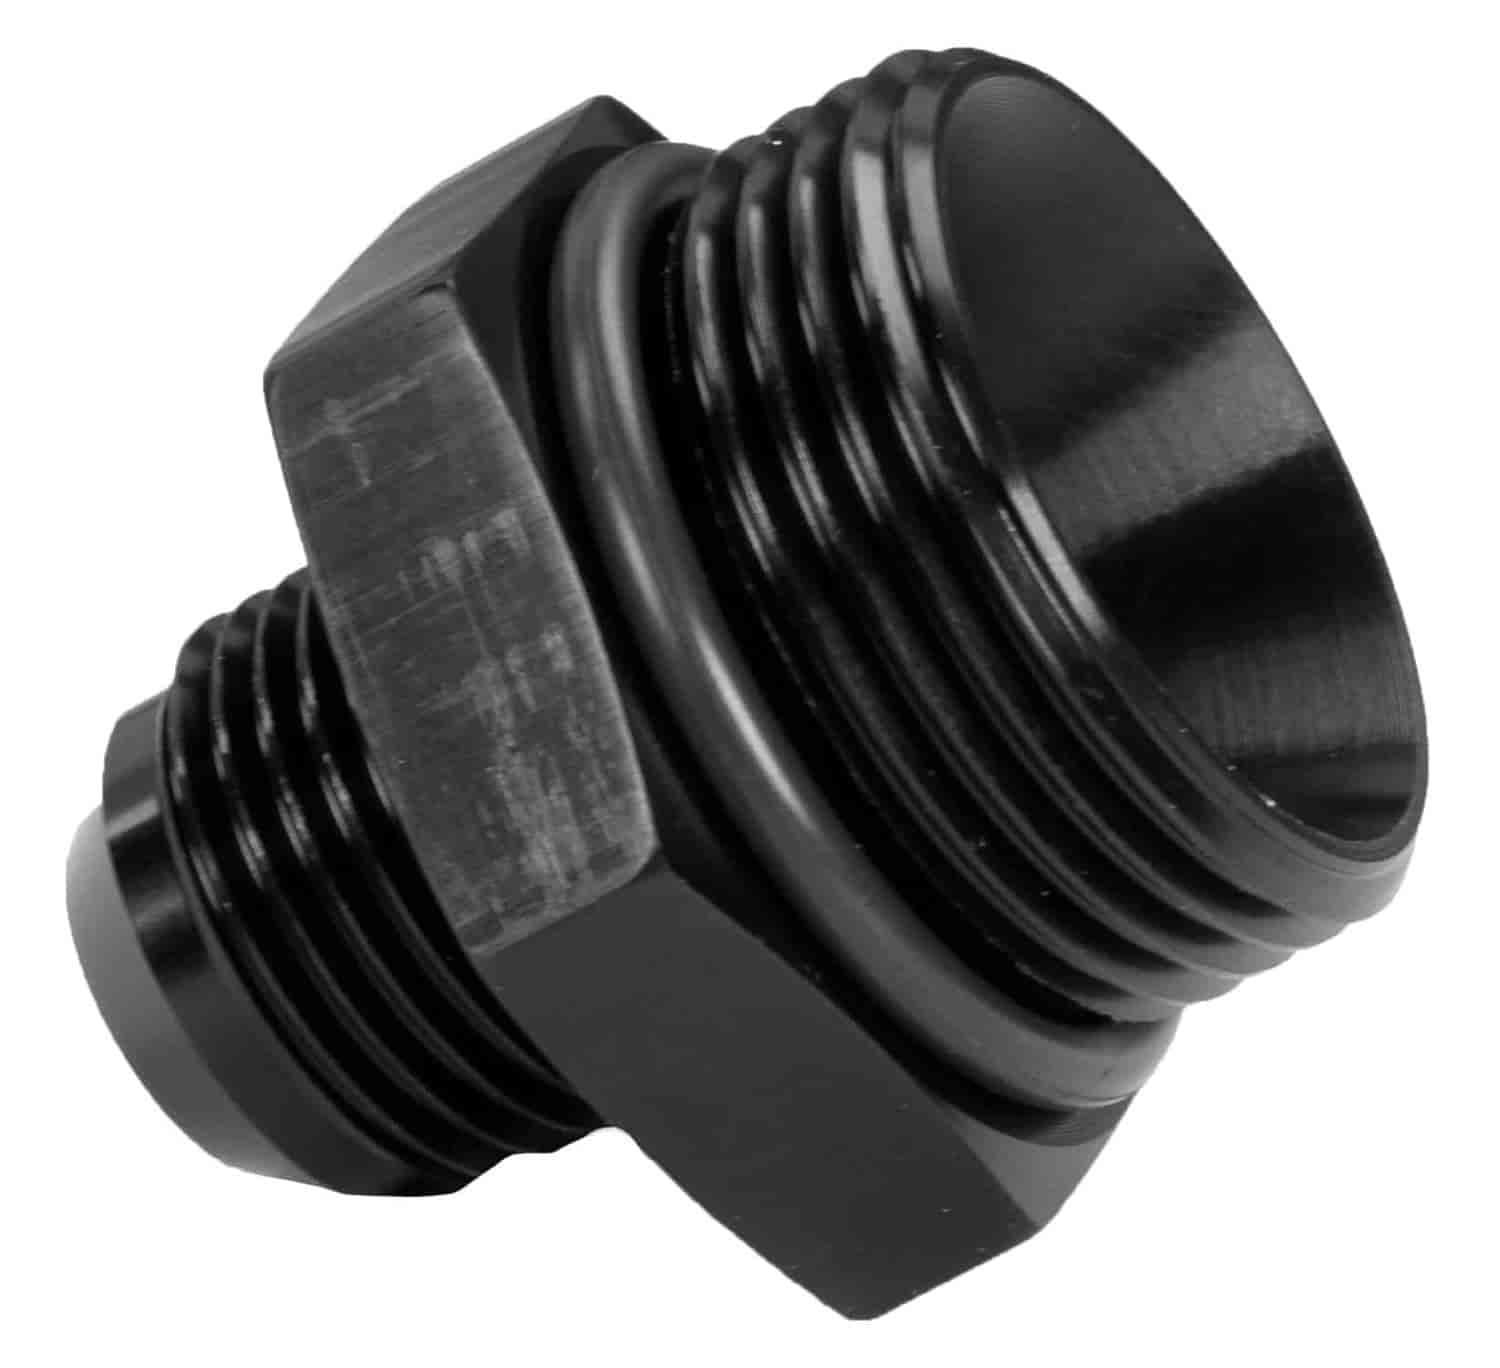 ORB/AN Flare Reducer Fitting -16 AN ORB to